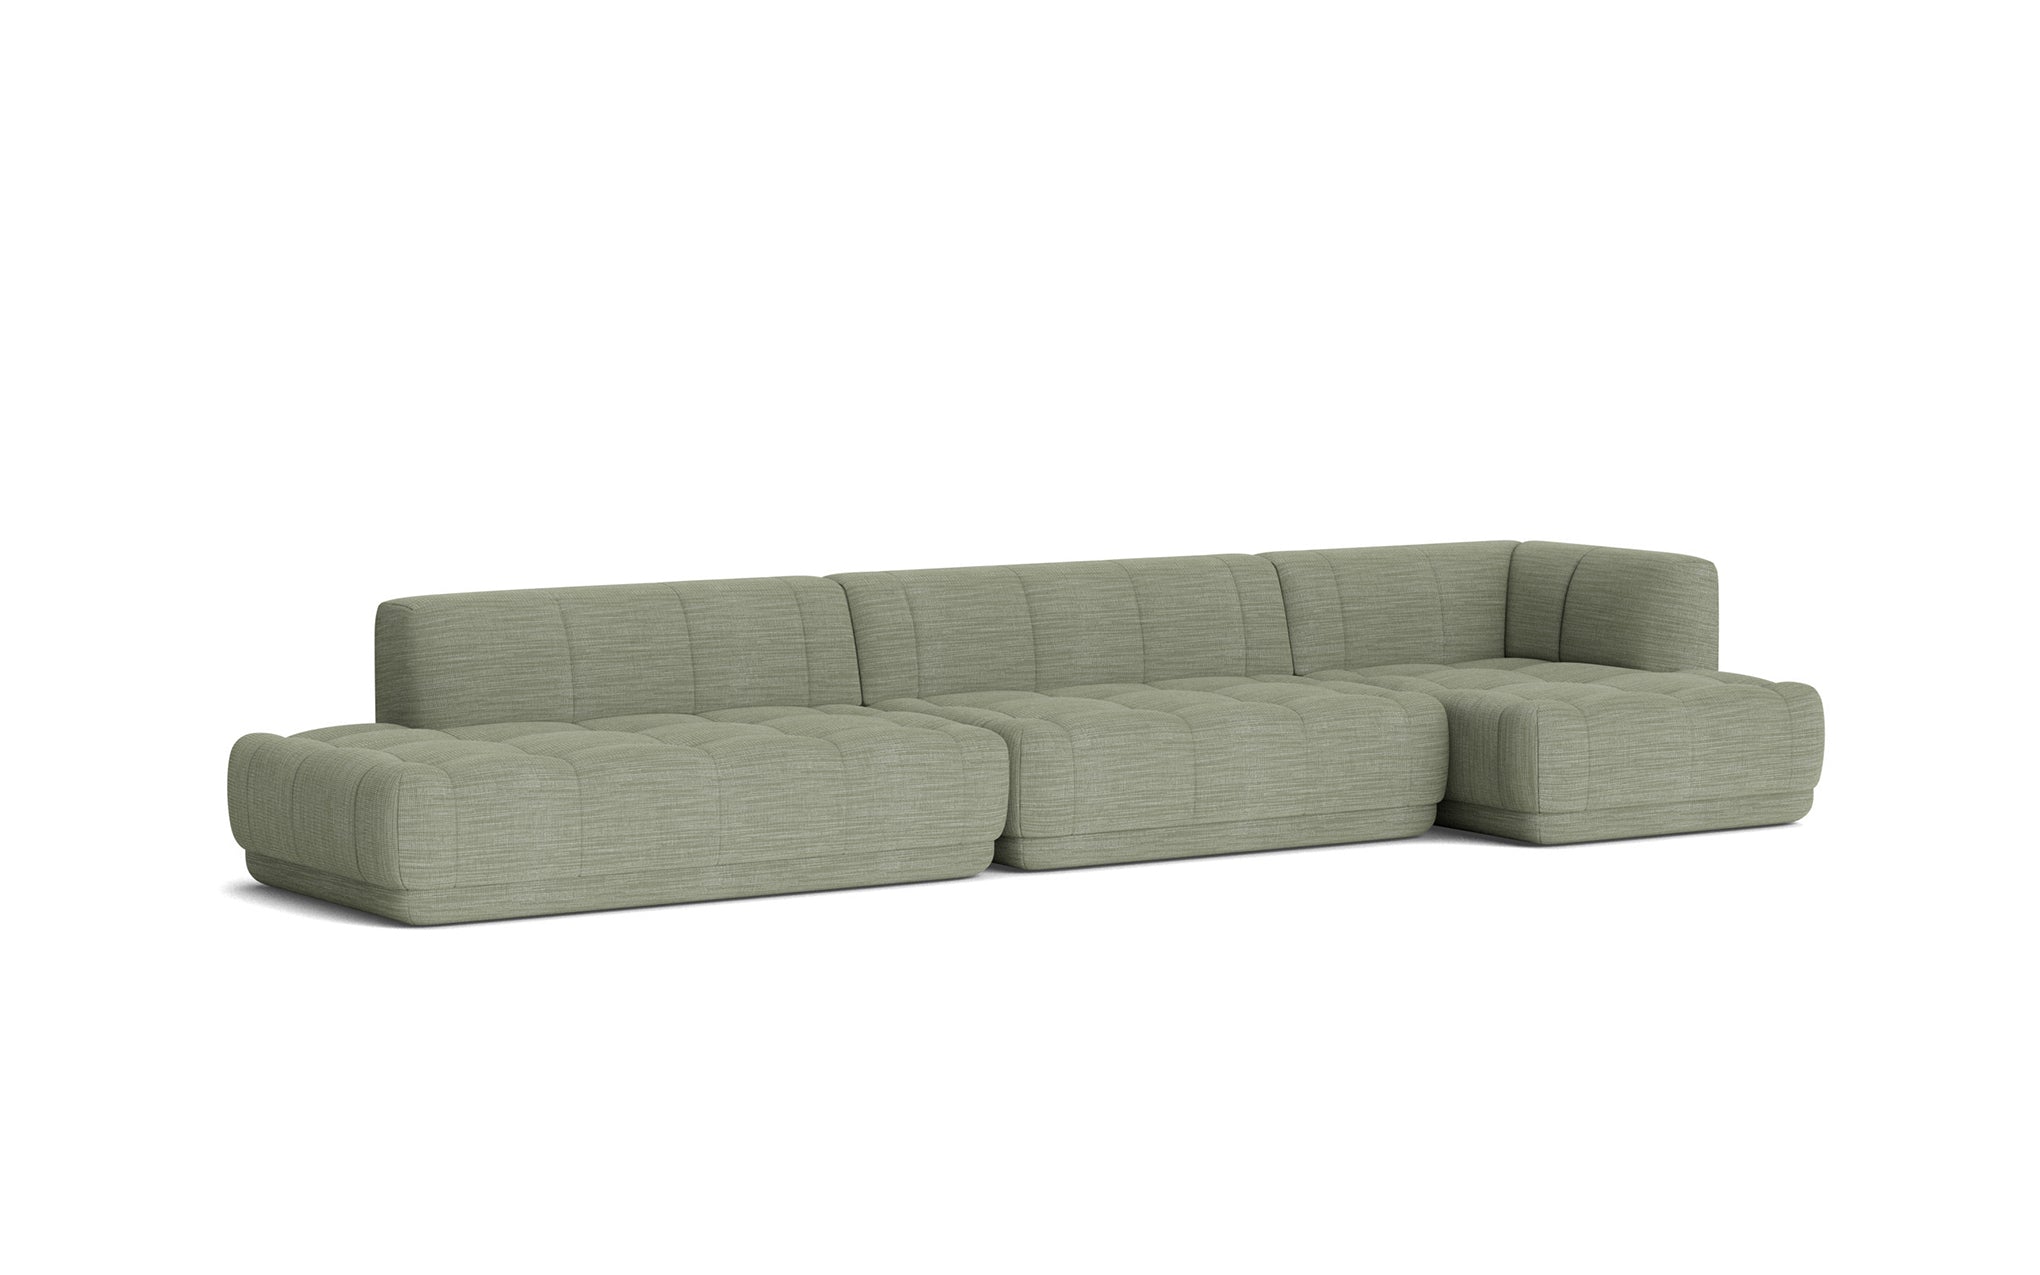 Quilton sofa combination 23 by Doshi Levien for HAY - SCP